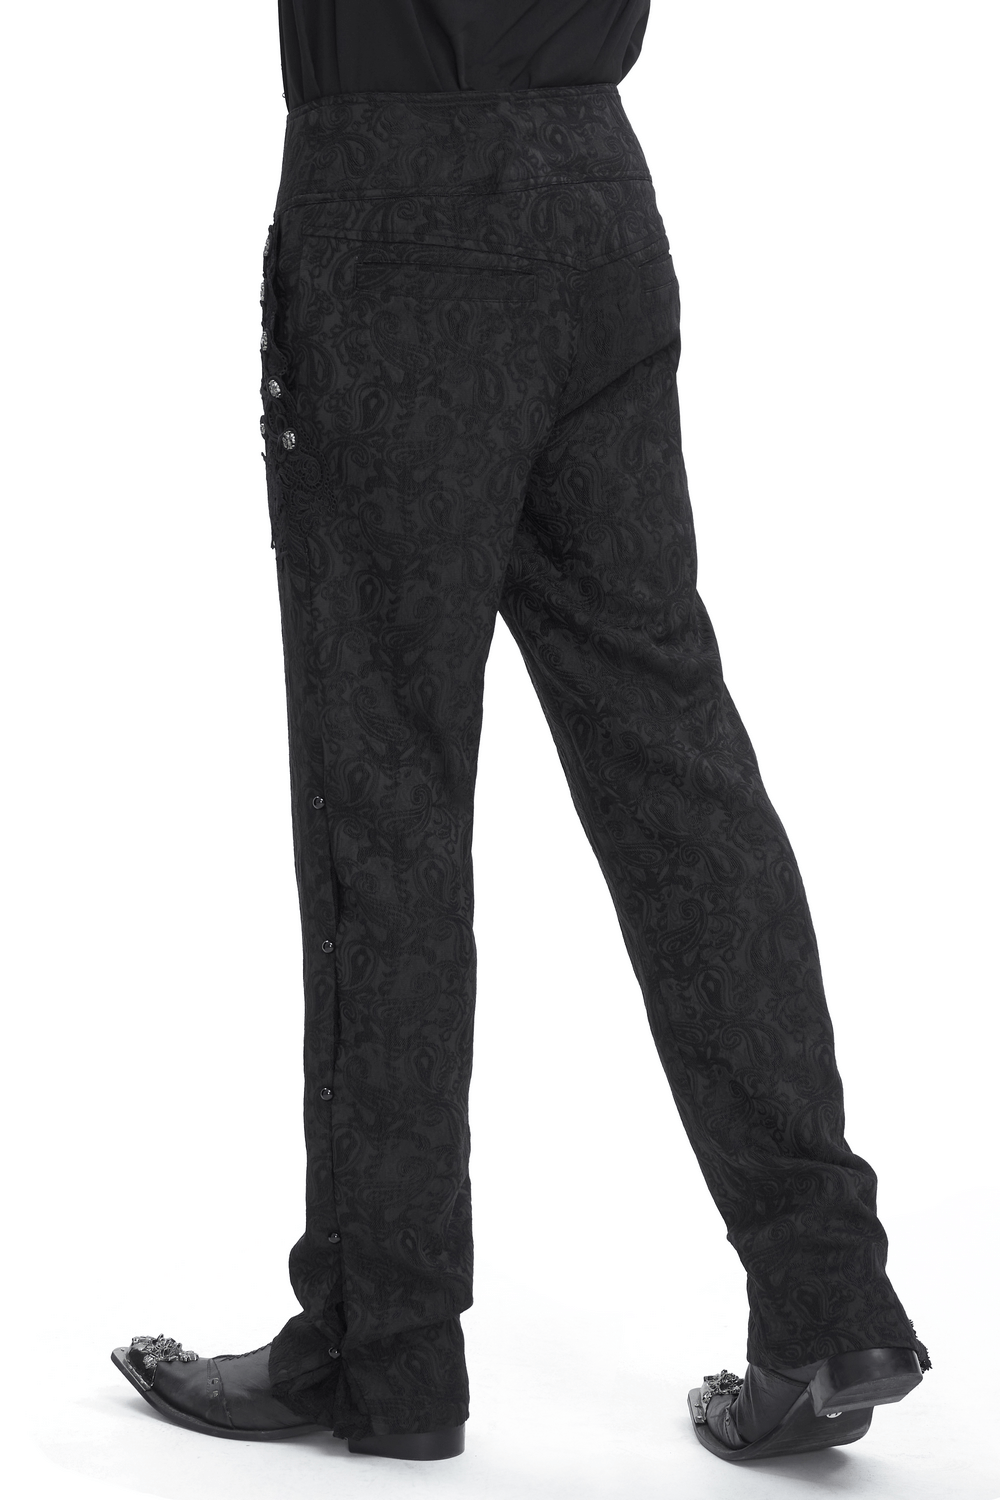 Exquisite Black Floral Embroidered Trousers with Lace